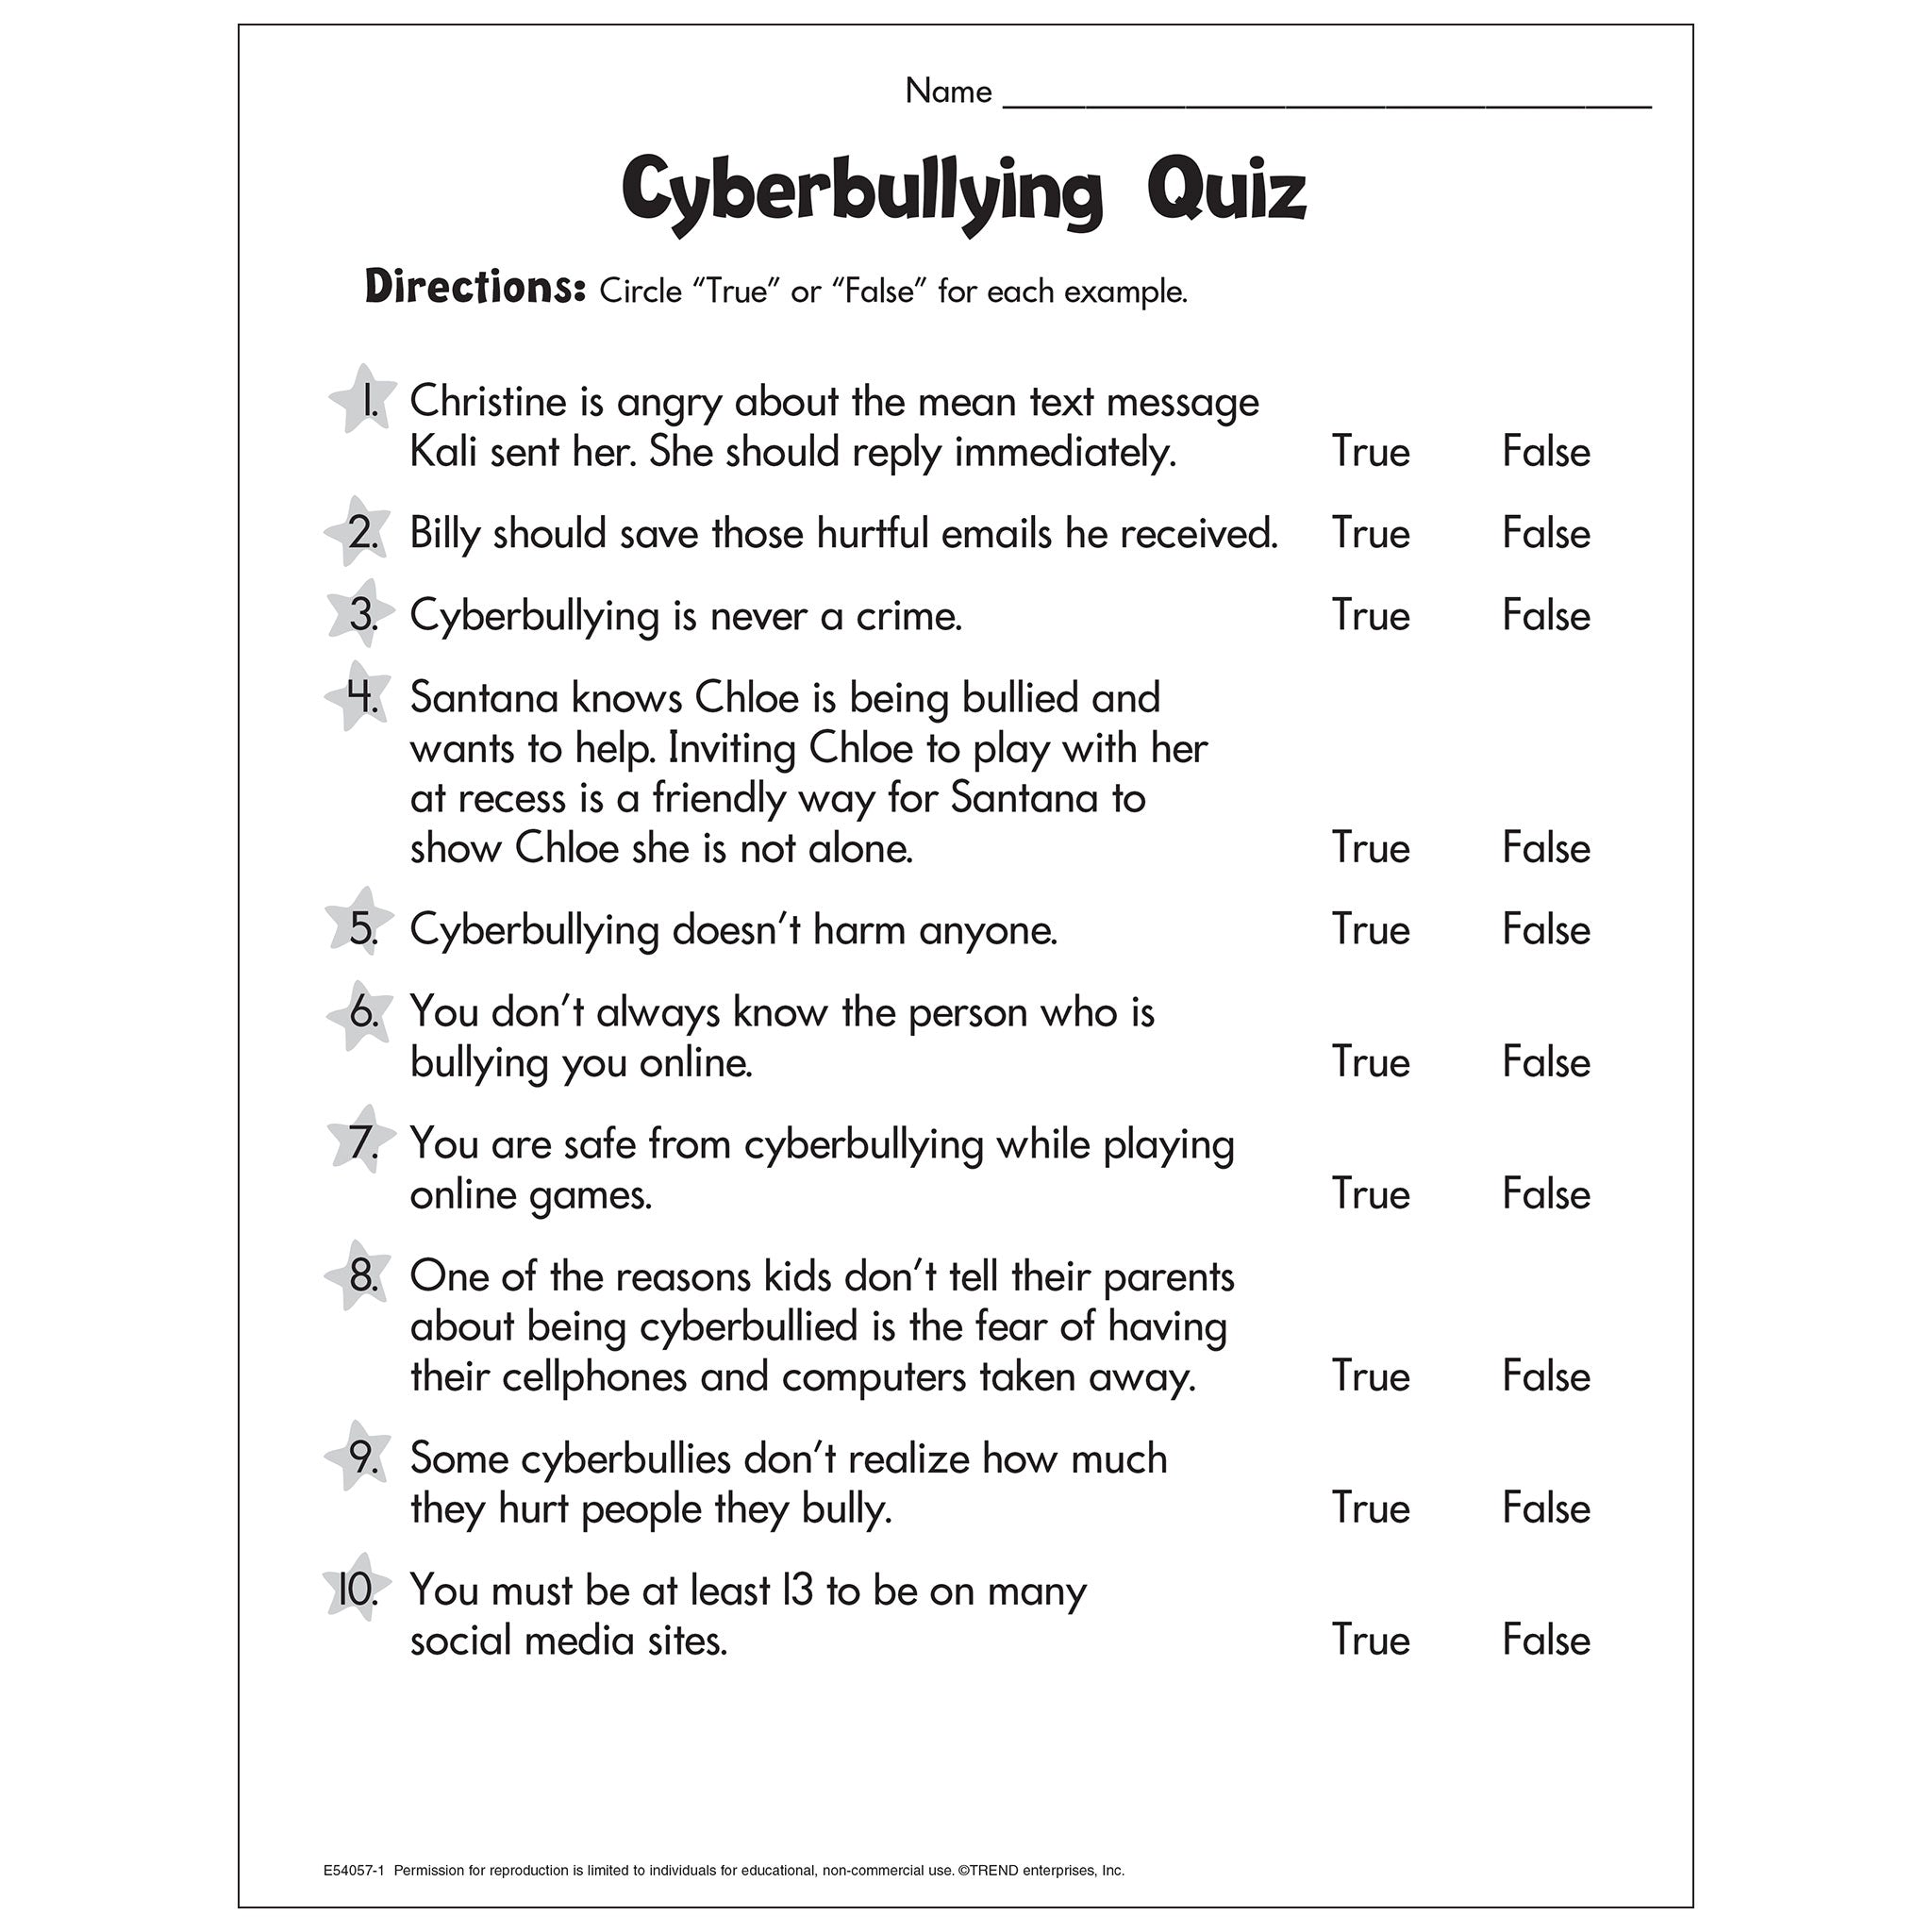 research questions on cyberbullying